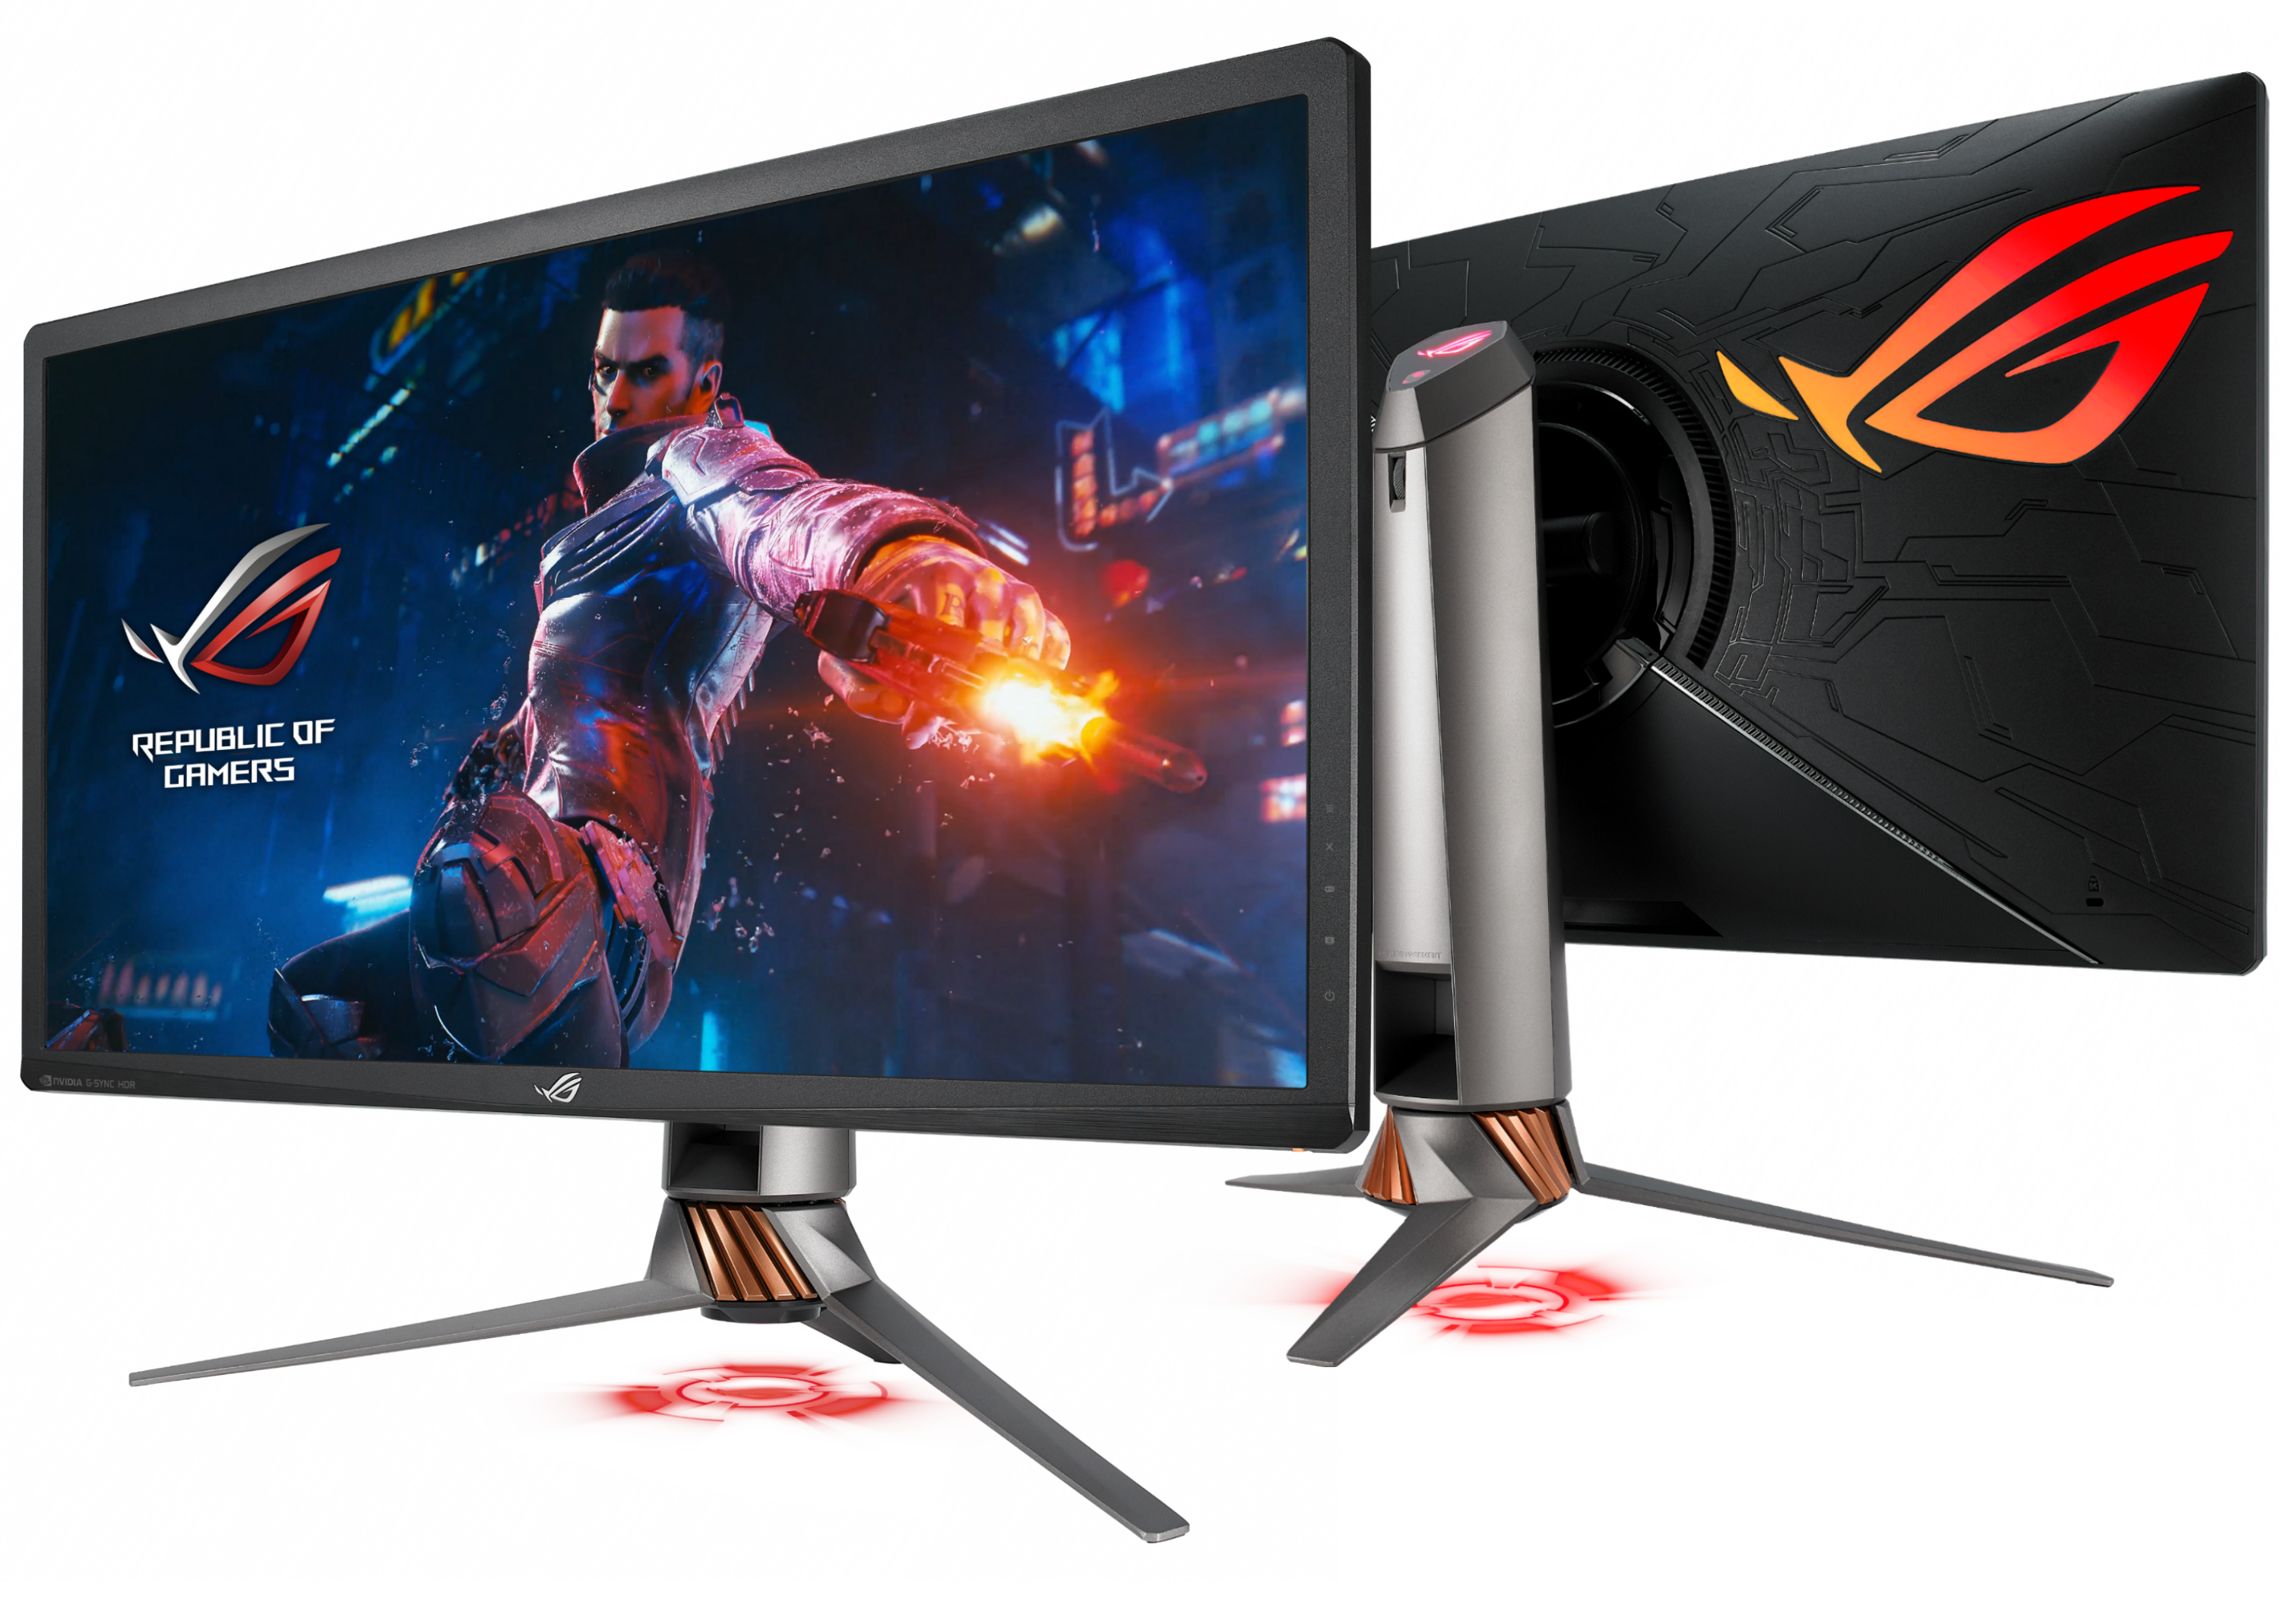 G Sync Ultimate Mini Led Hdr Monitors Unveiled At Computex 19 The Best Gets Even Better